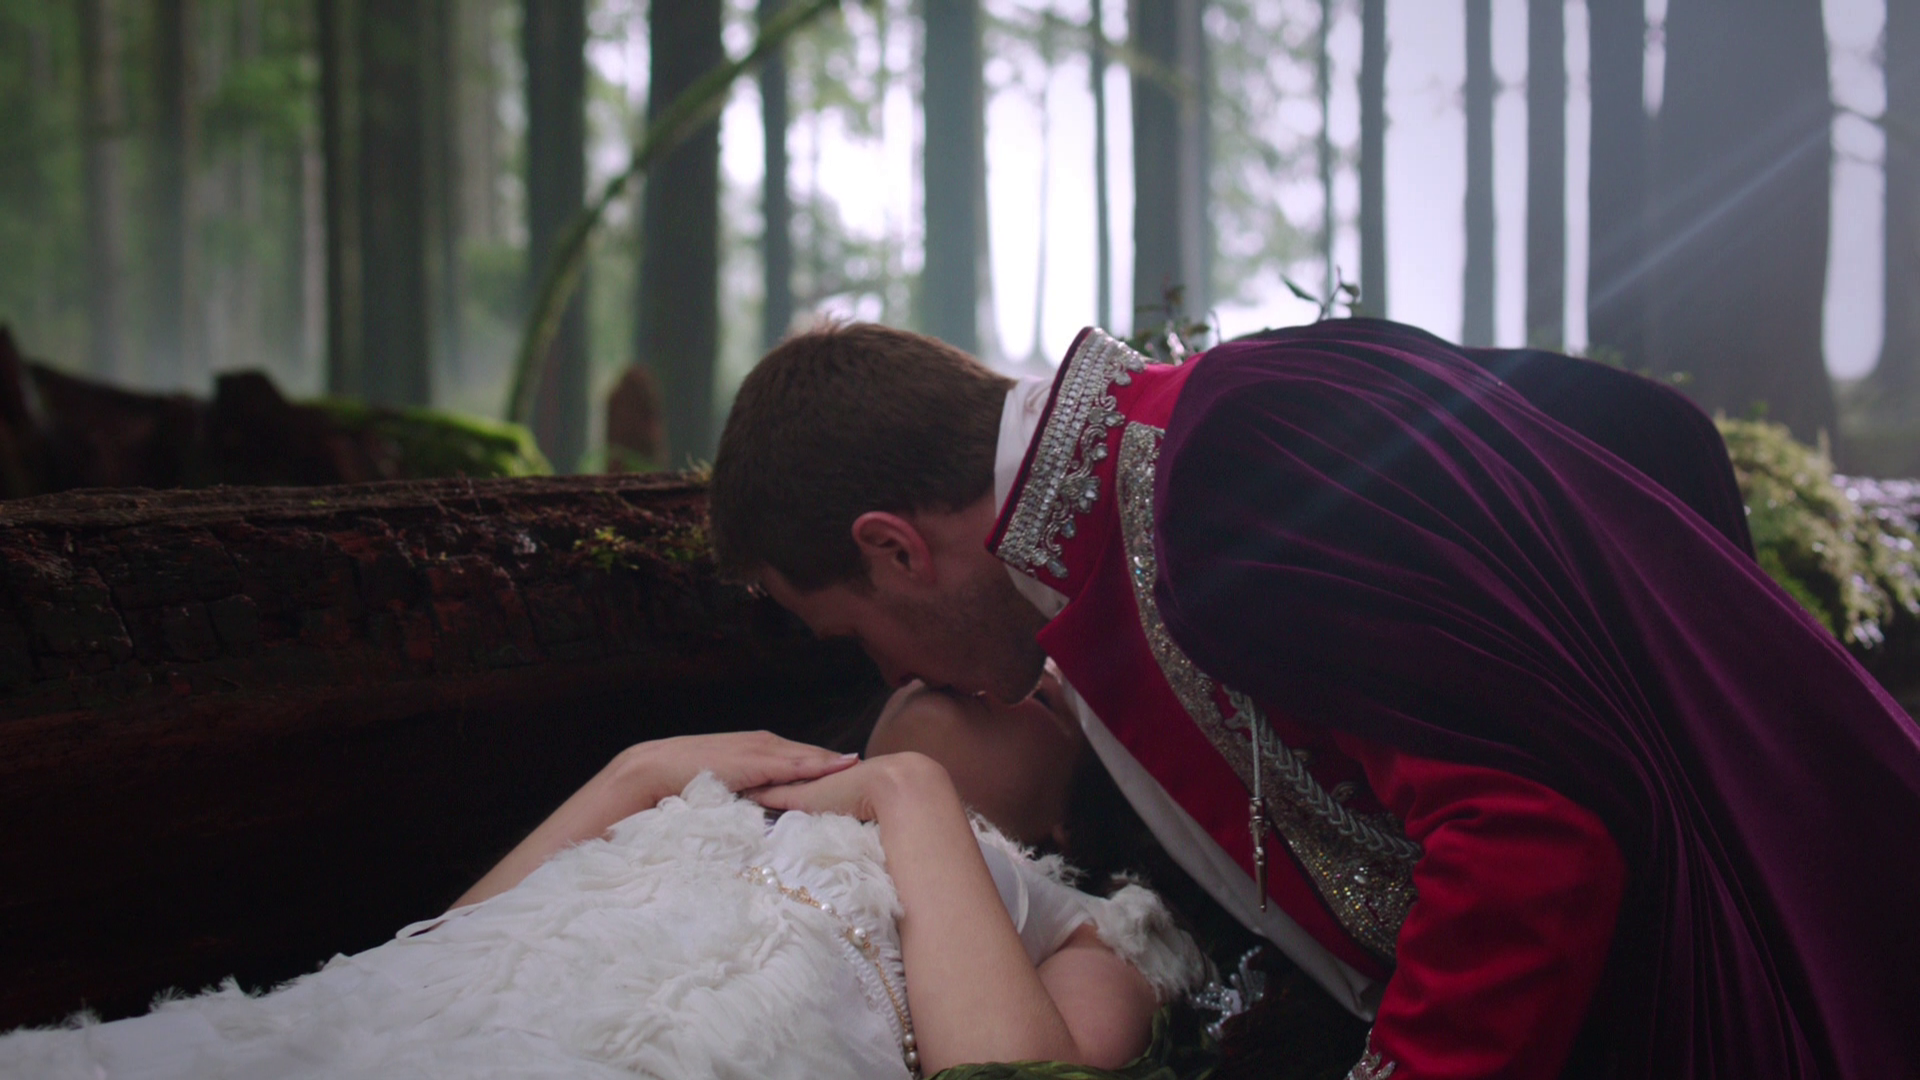 Prince Charming wakes Snow White with a kiss in the first minute of OUAT's pilot episode.